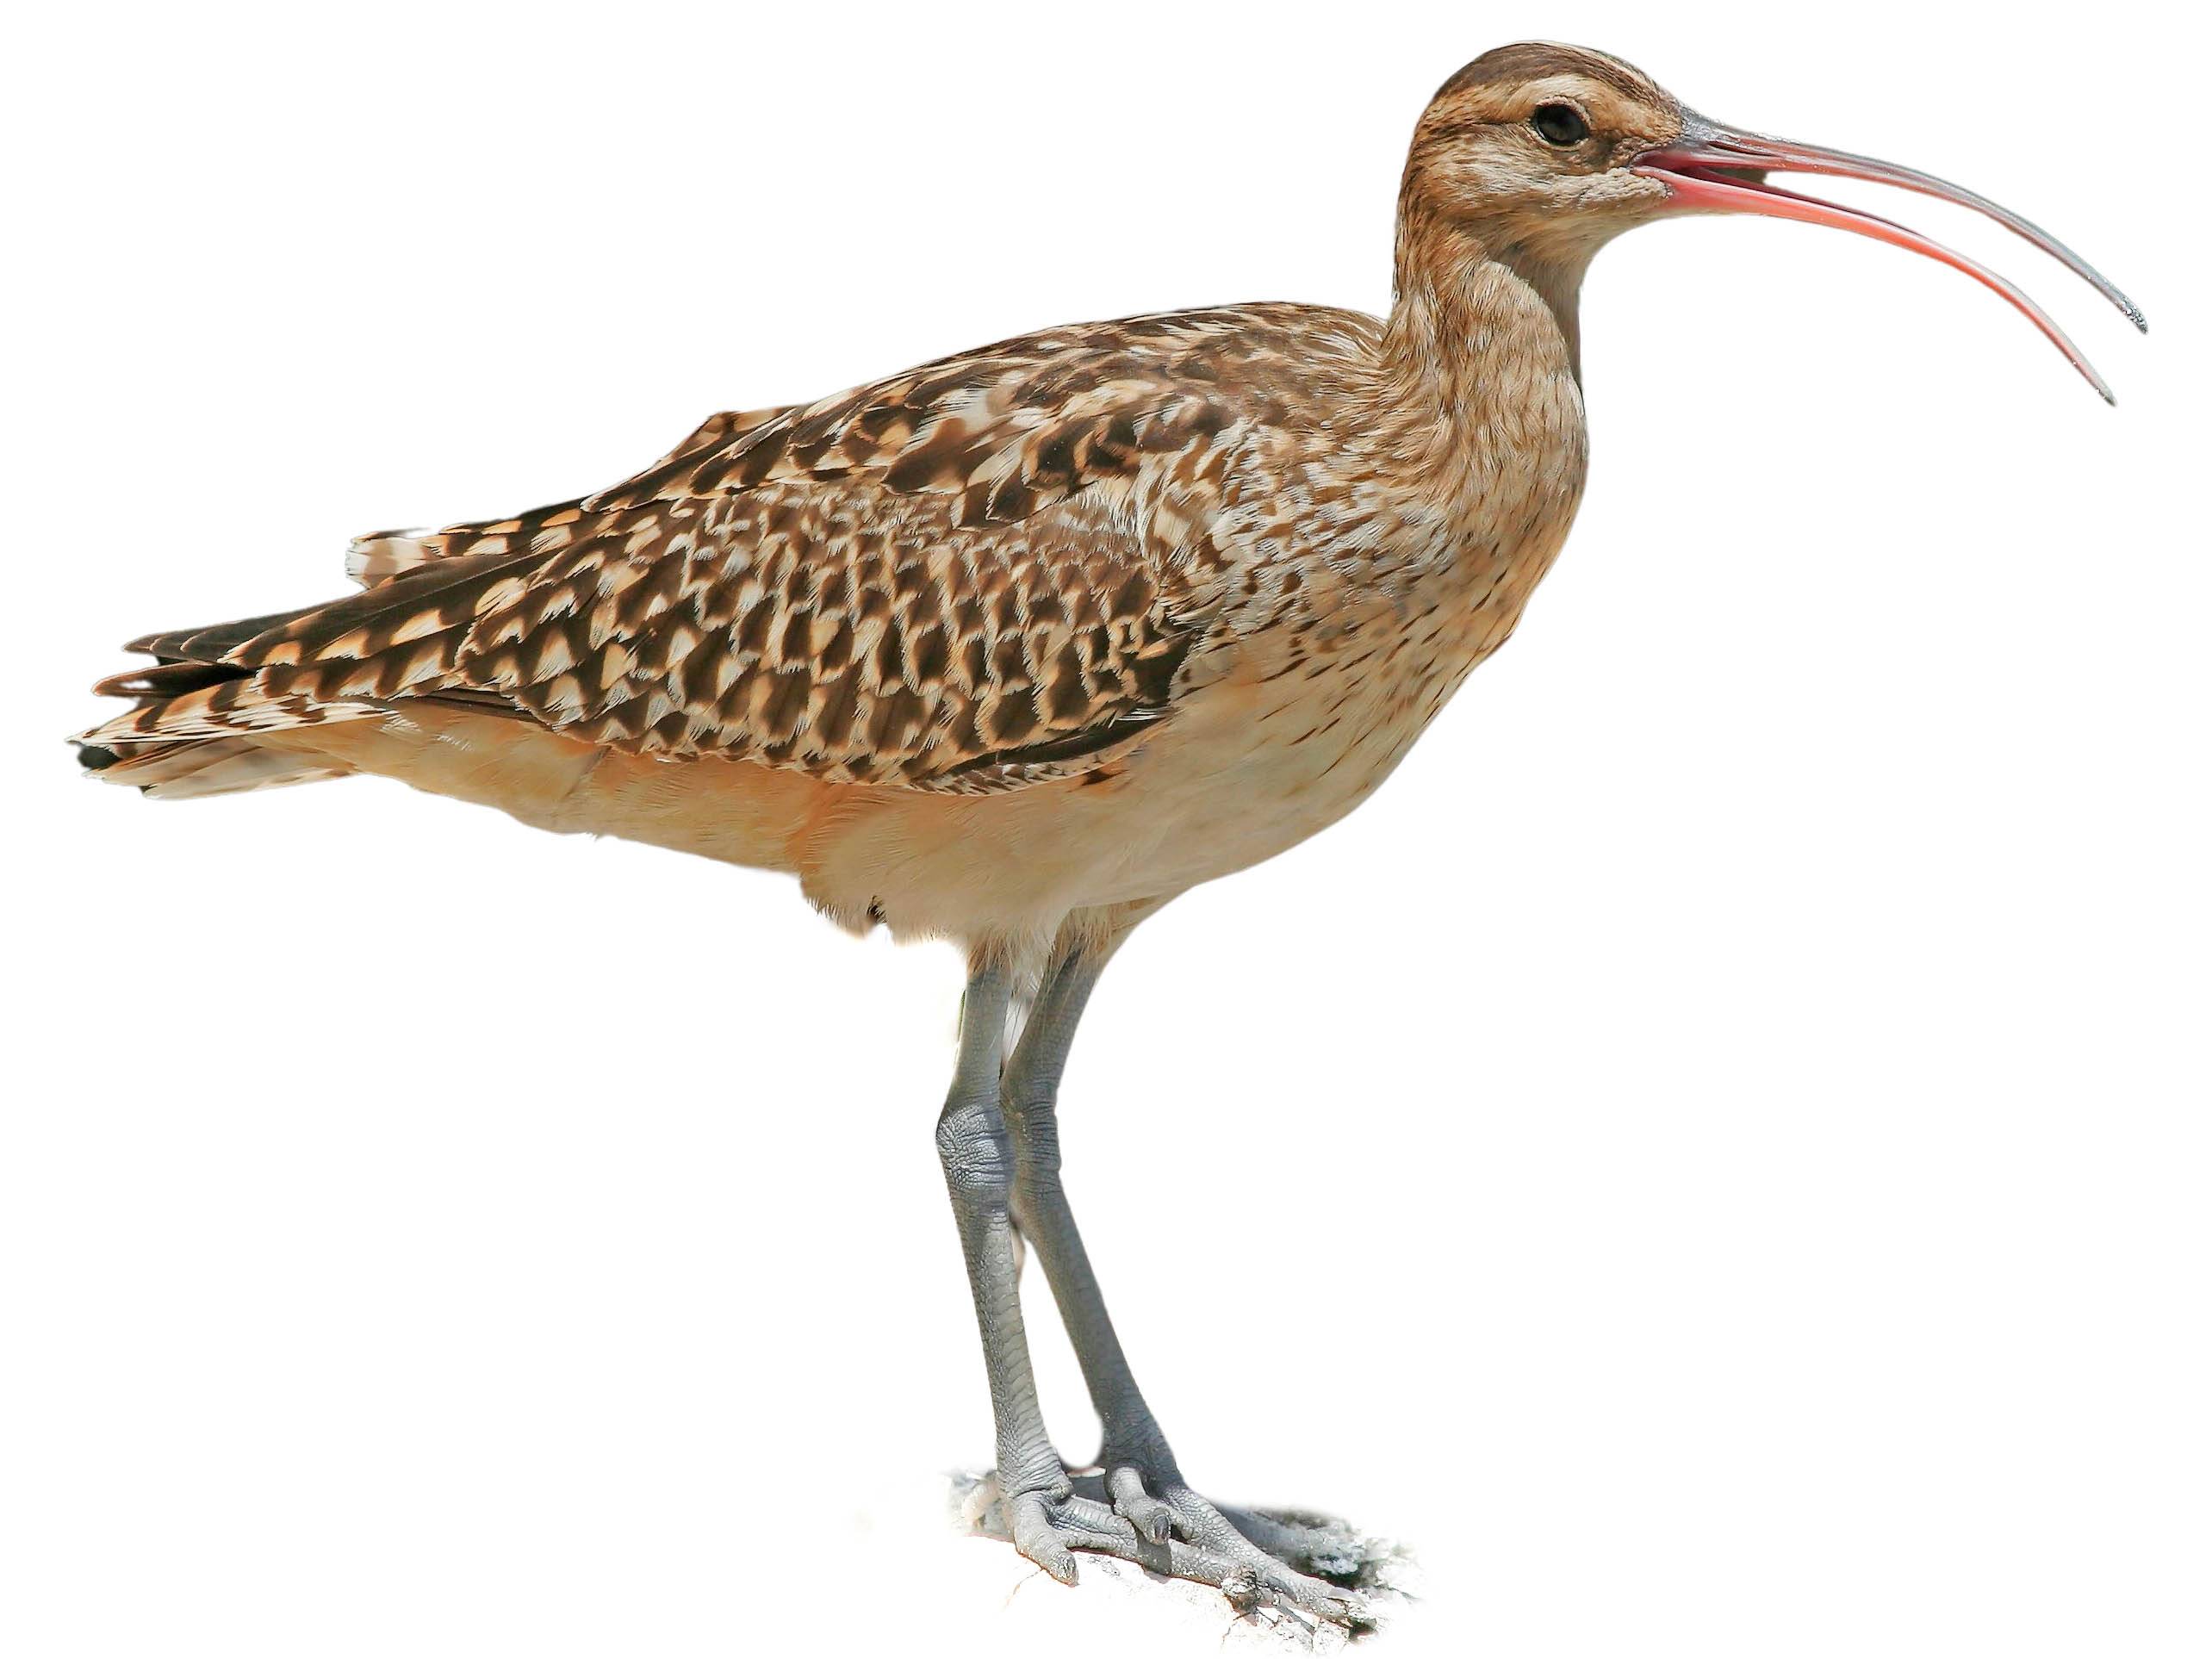 A photo of a Bristle-thighed Curlew (Numenius tahitiensis)